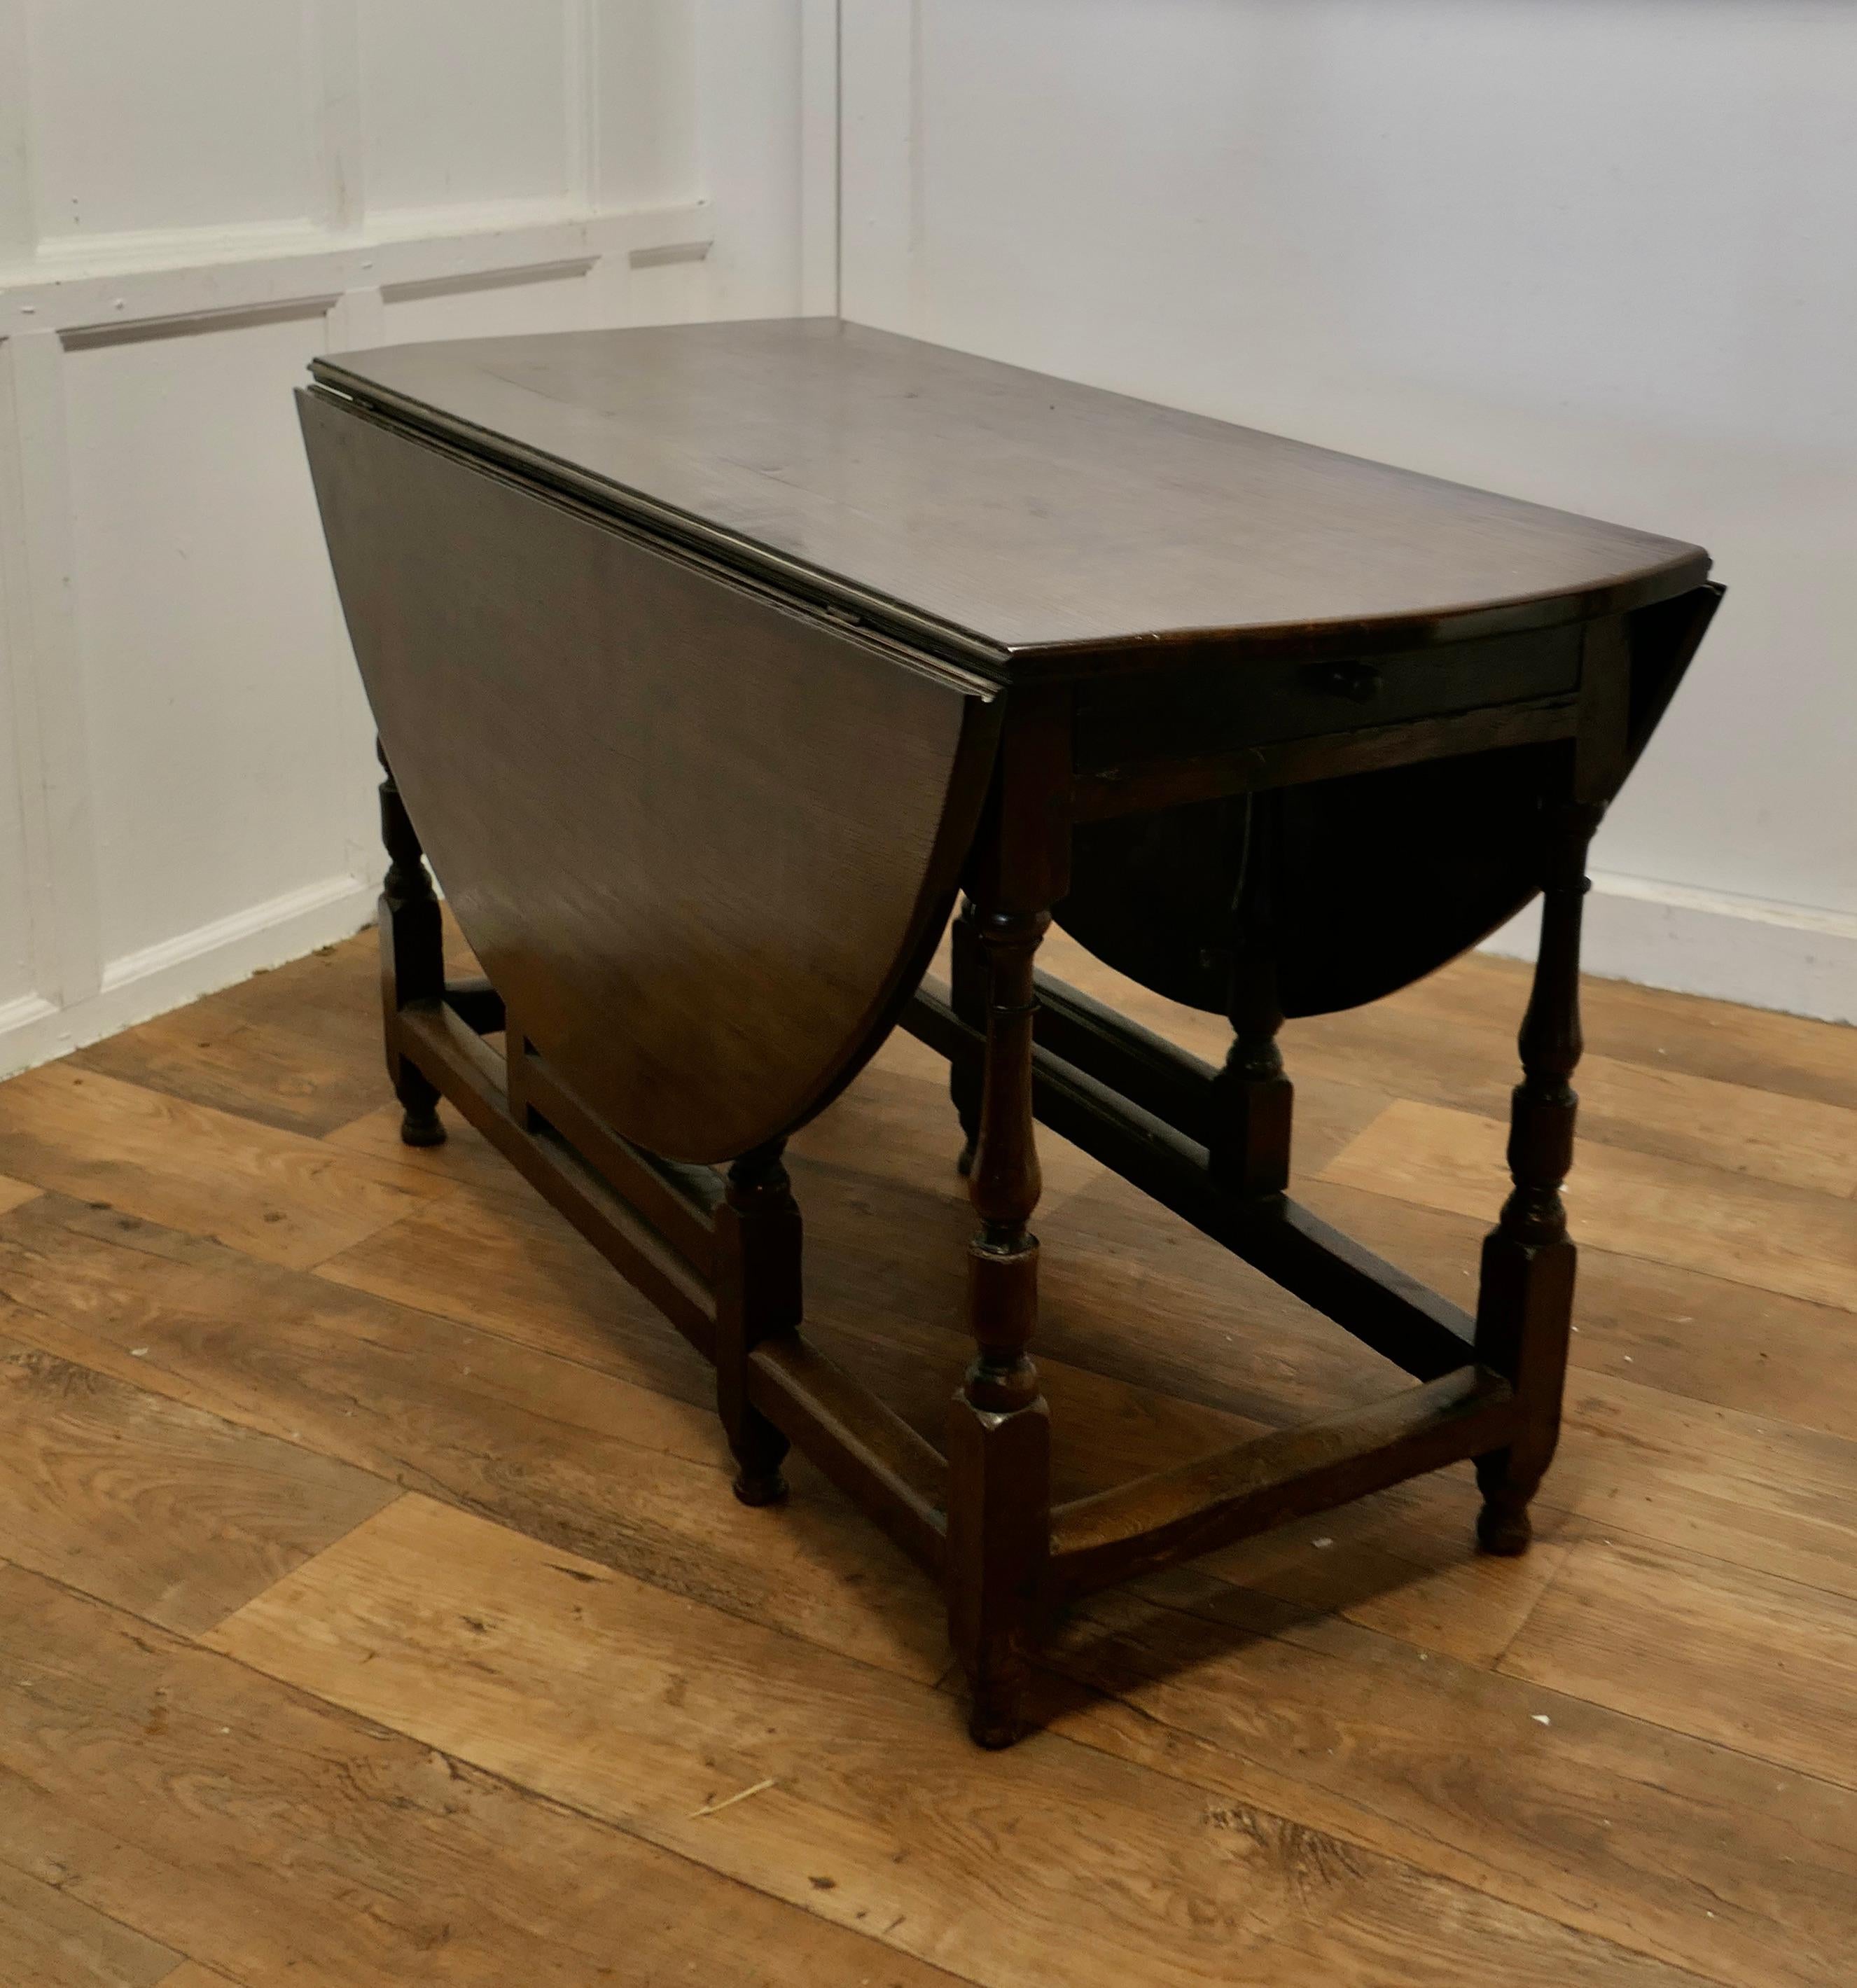 Georgian Solid Oak Gate Leg Dining Table

This is a Good Solid Oak Gate Leg Table, it is a large side and will seat 6 diners
The table is Oval and made from solid Oak it has elegant crisply turned legs and Oak cross members with a drawer at one end,